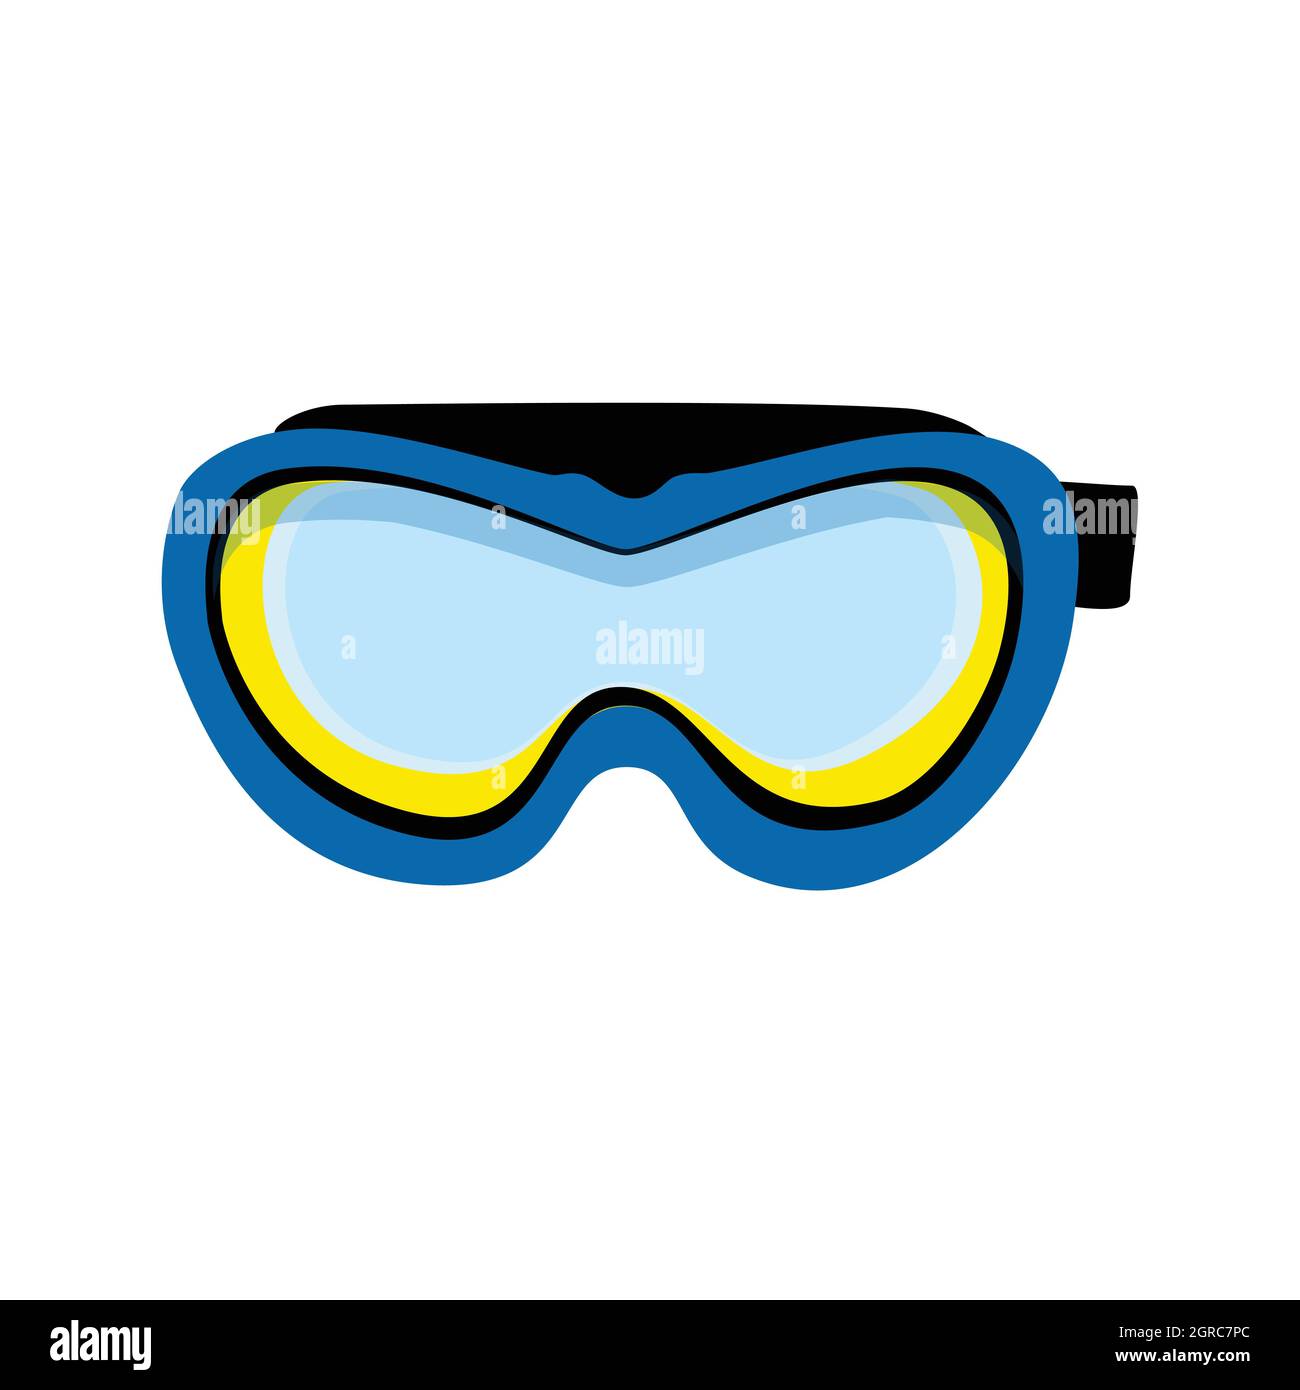 Blue diving mask. Diving mask isolated on white background. Swimming equipment Stock Vector